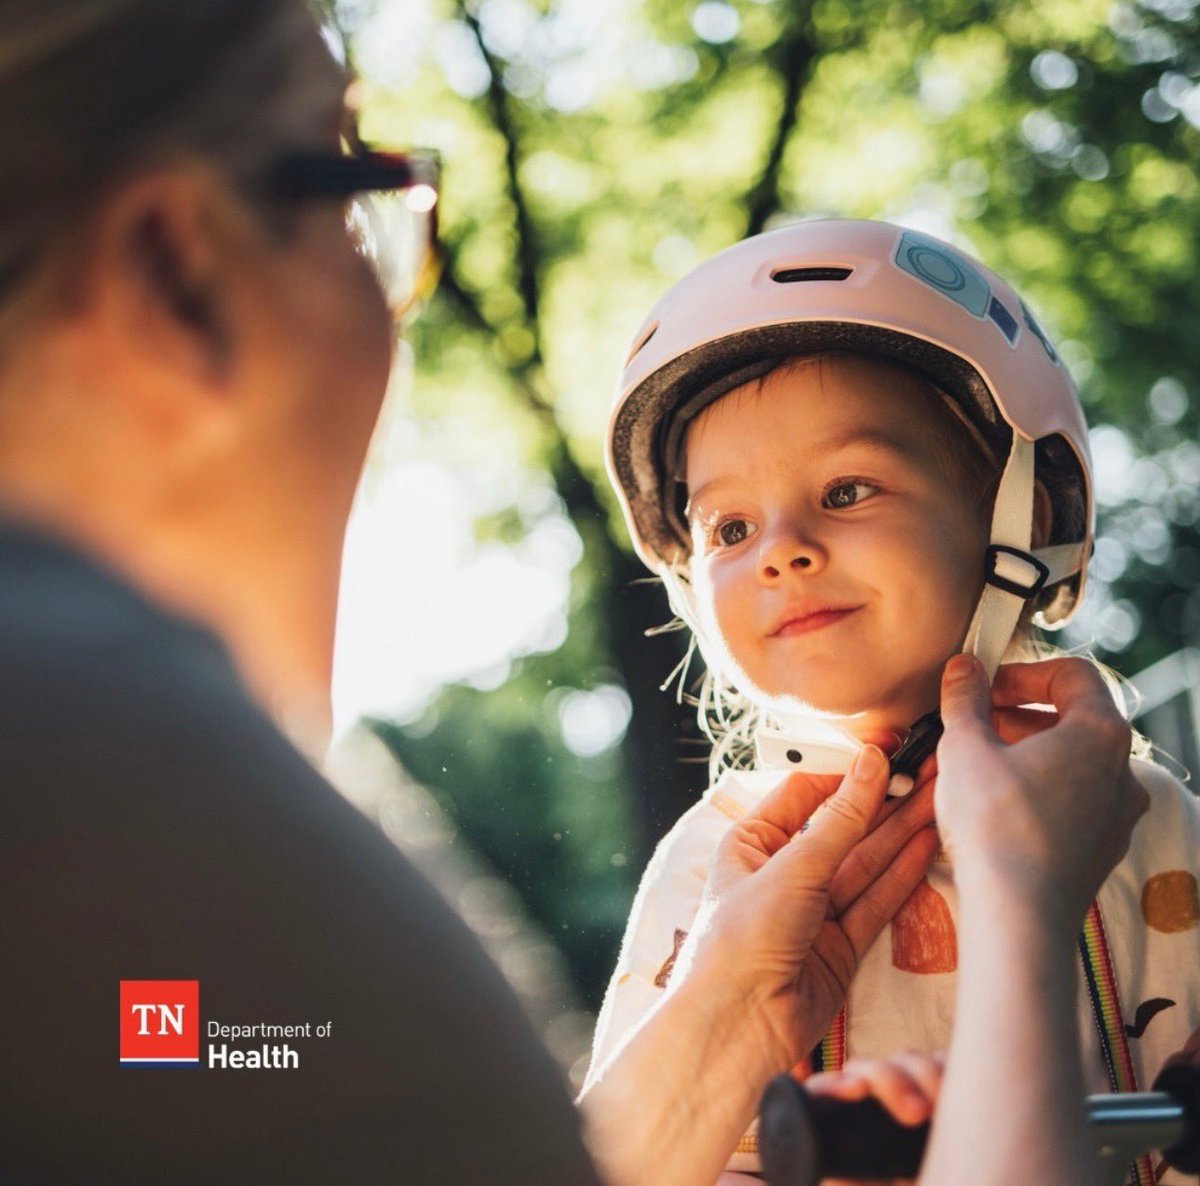 School is out and now is the time to take extra precaution while kids are outdoors playing. 

Parents, prioritize safety! Before your child hops on a bike, double-check their gear. Helmets are a must, and bright clothing is a smart choice.  #GearUpTN @NFLAlumni  @TNDeptofHealth